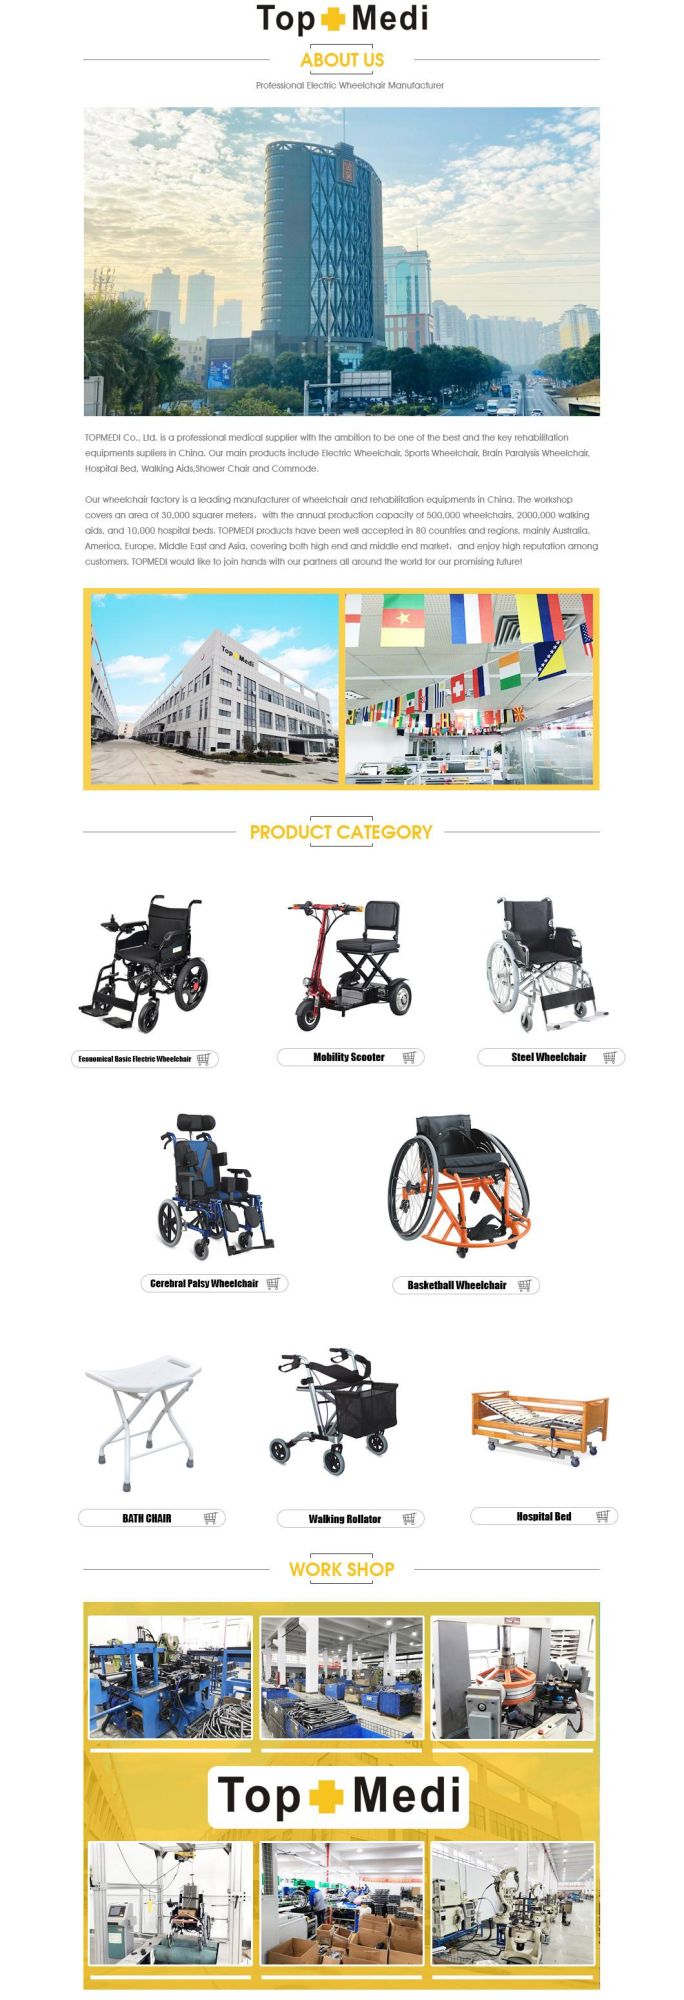 4 Wheels Walking Walker Rollator with Seat for The Elderly and Disabled People